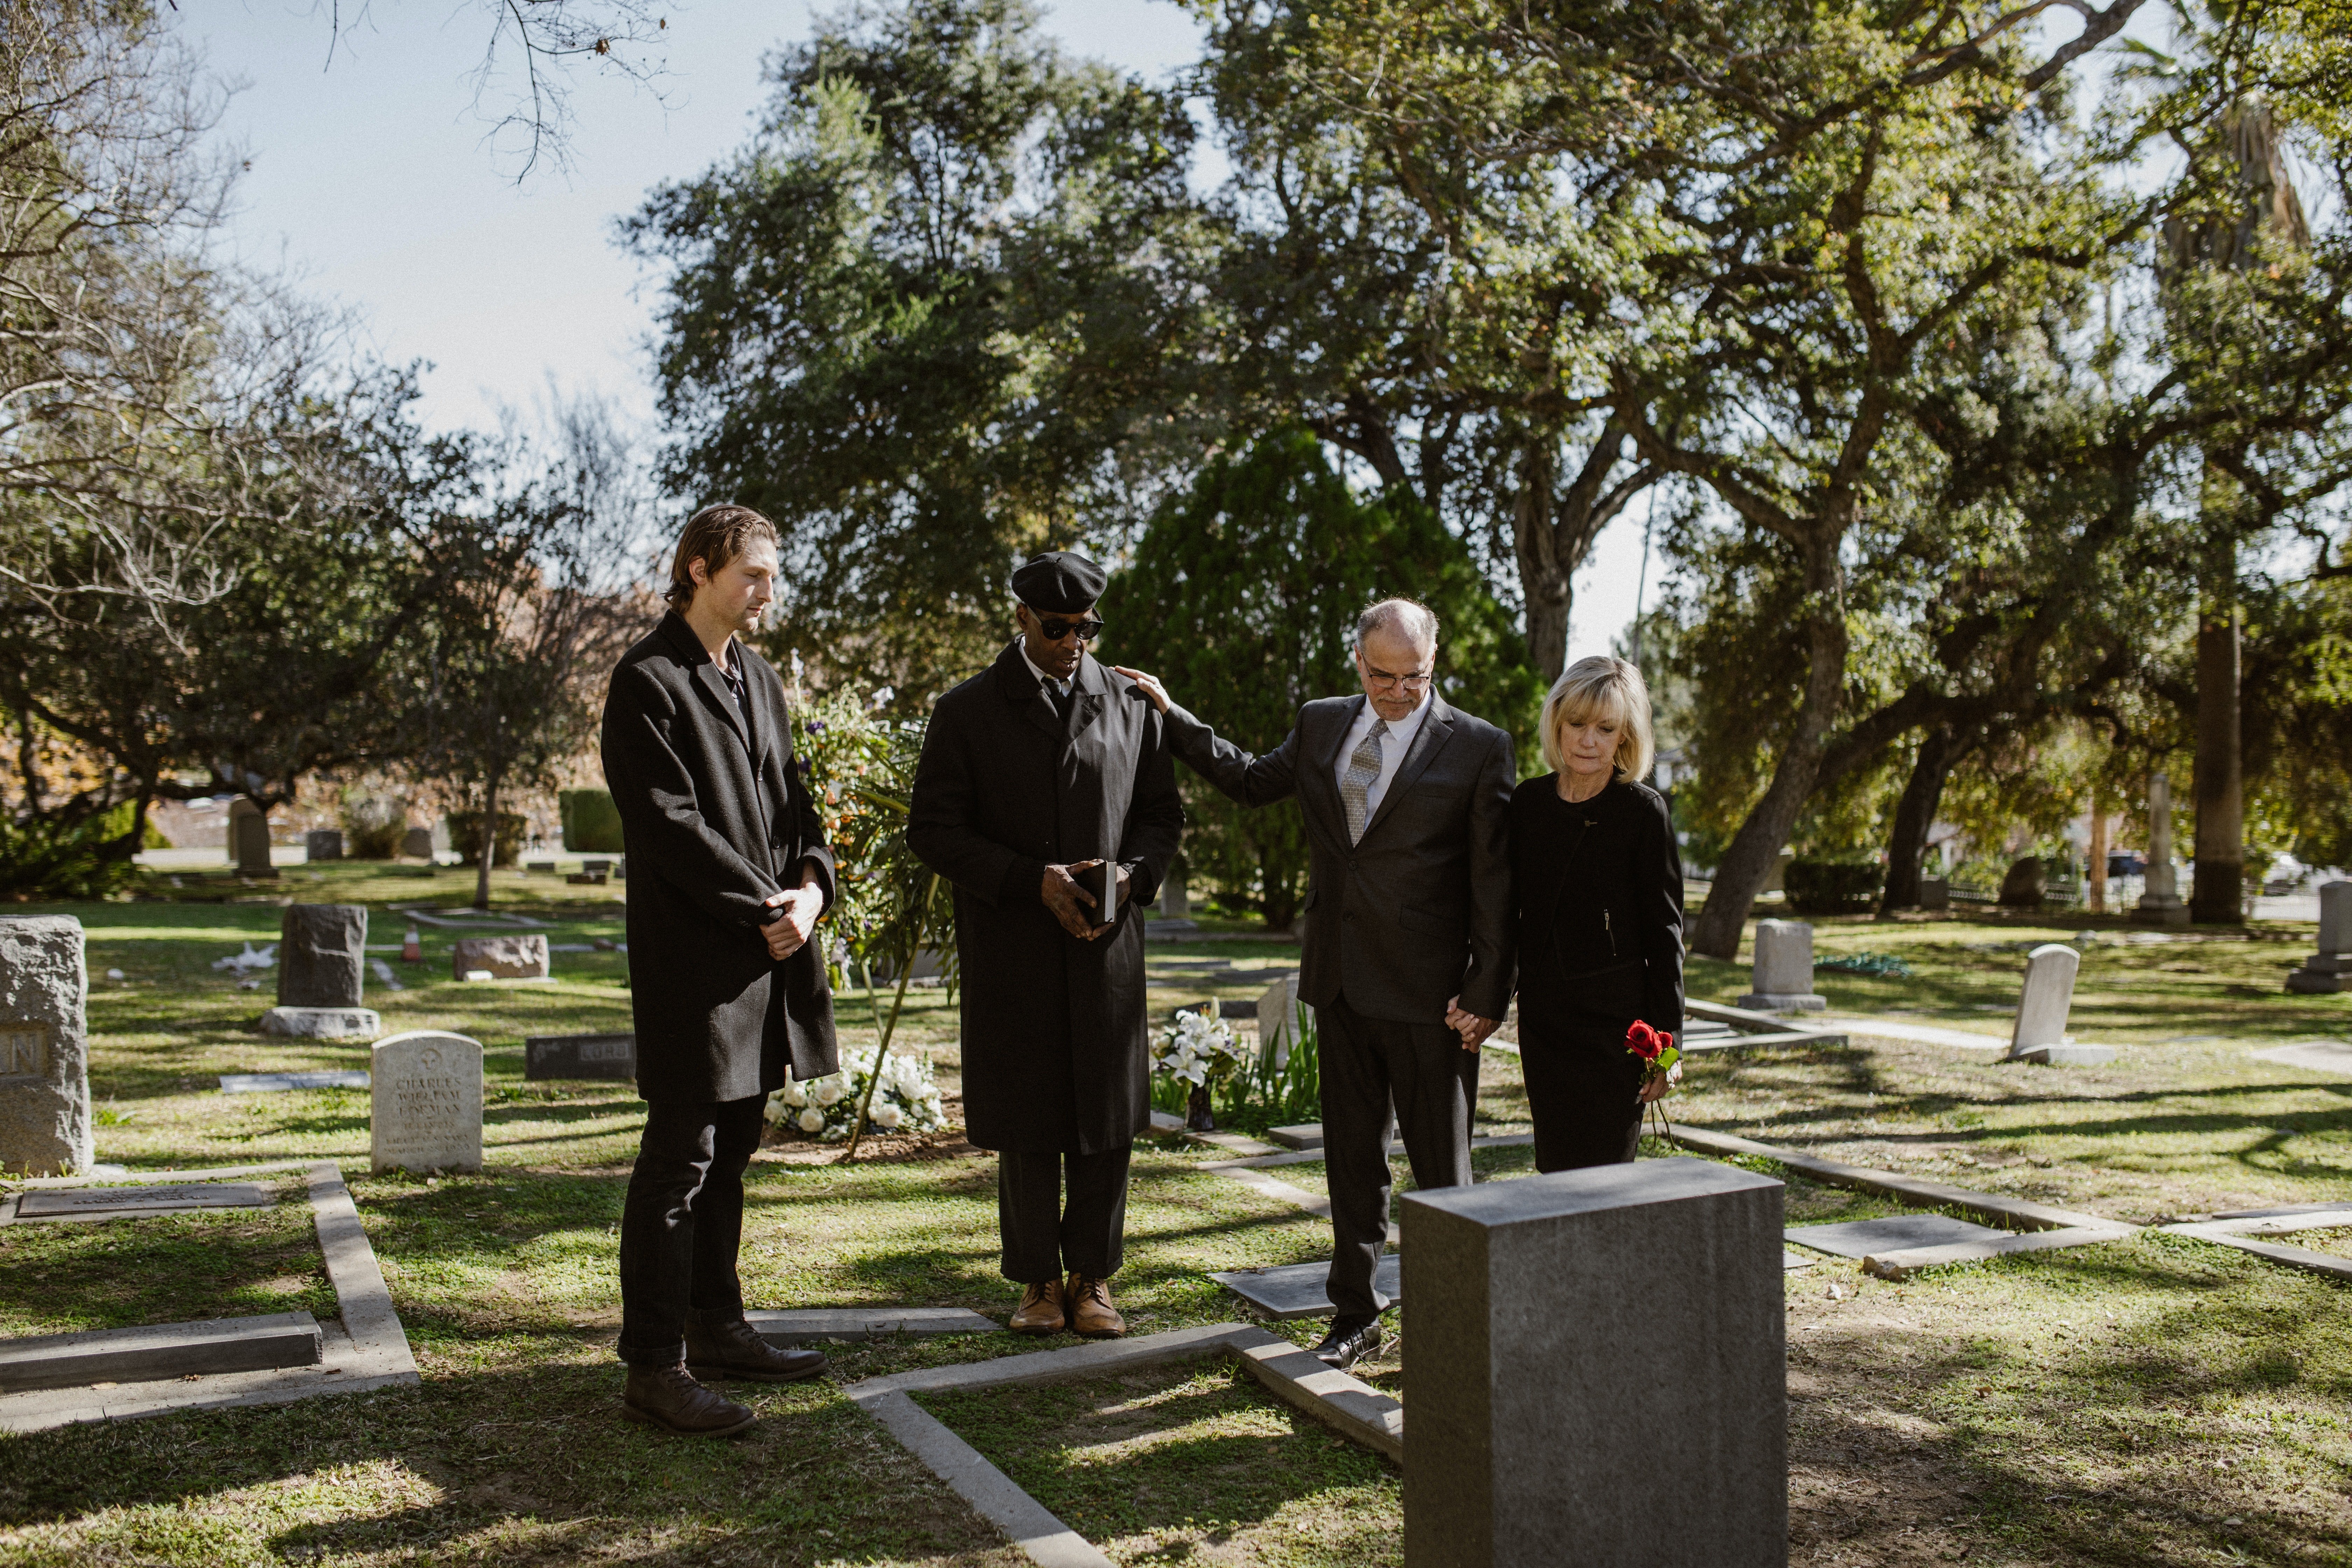 People in a cemetery | Photo: Pexels